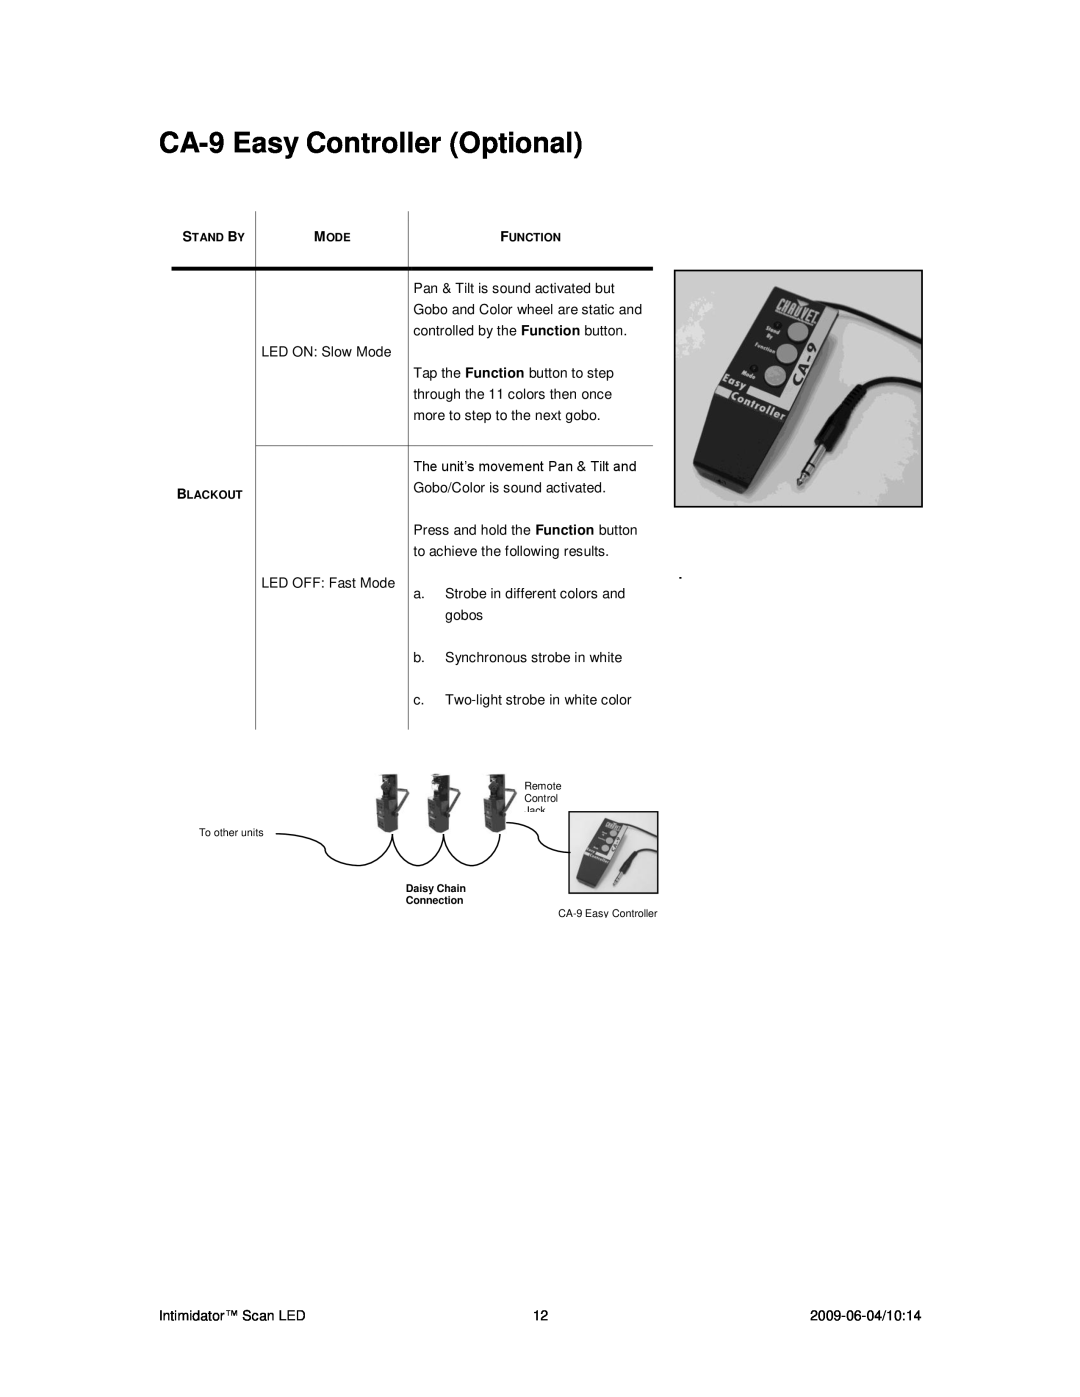 Chauvet a 2009-06-04, 10:14 user manual CA-9Easy Controller Optional 